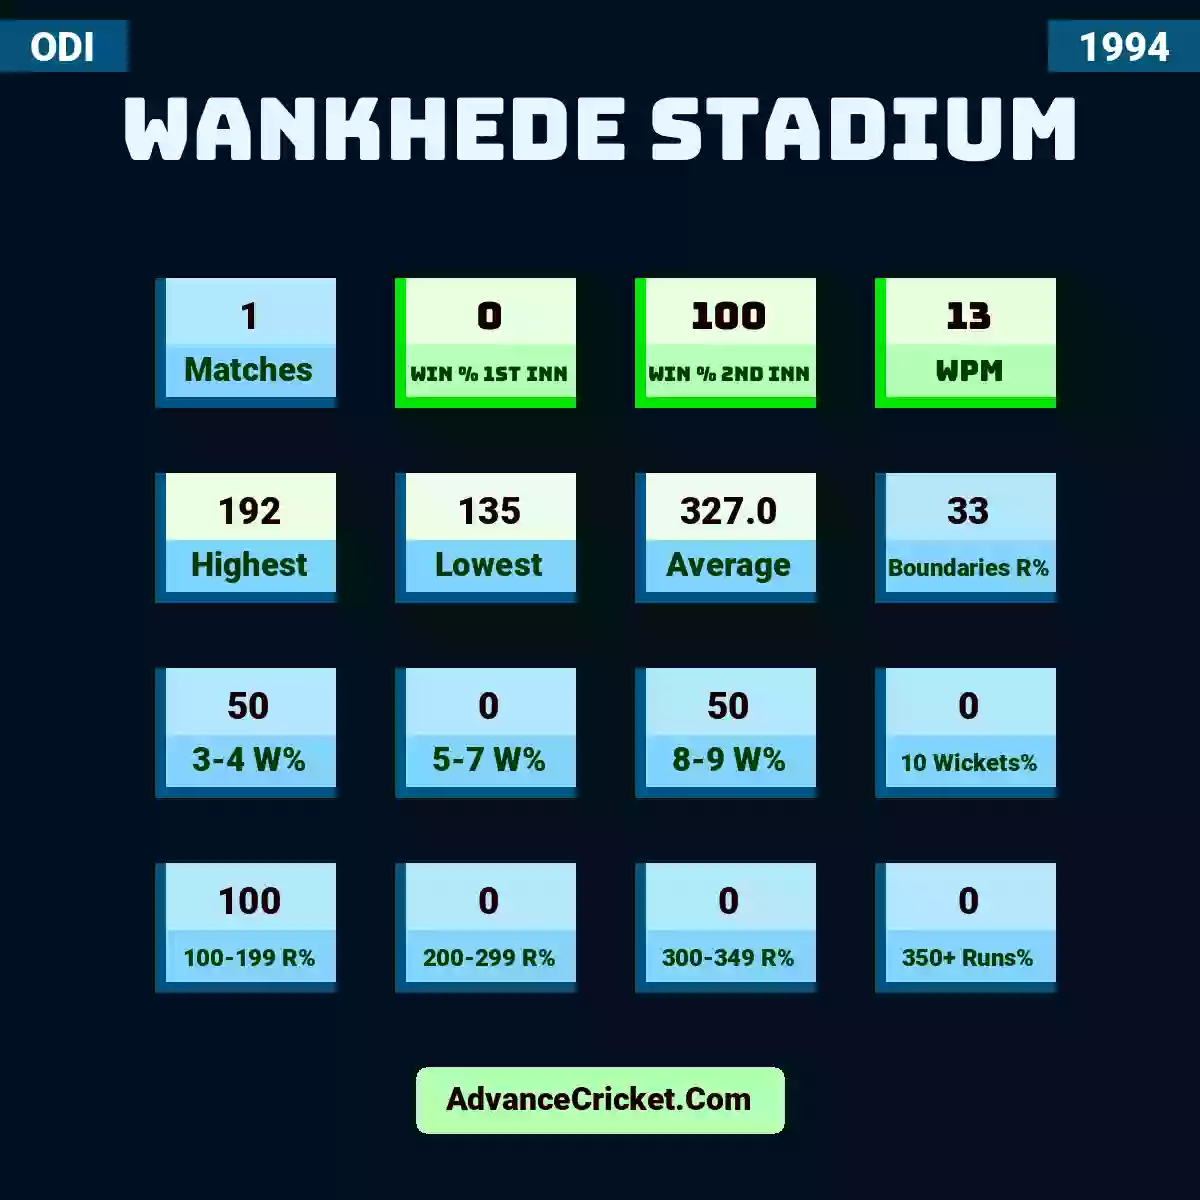 Image showing Wankhede Stadium with Matches: 1, Win % 1st Inn: 0, Win % 2nd Inn: 100, WPM: 13, Highest: 192, Lowest: 135, Average: 327.0, Boundaries R%: 33, 3-4 W%: 50, 5-7 W%: 0, 8-9 W%: 50, 10 Wickets%: 0, 100-199 R%: 100, 200-299 R%: 0, 300-349 R%: 0, 350+ Runs%: 0.